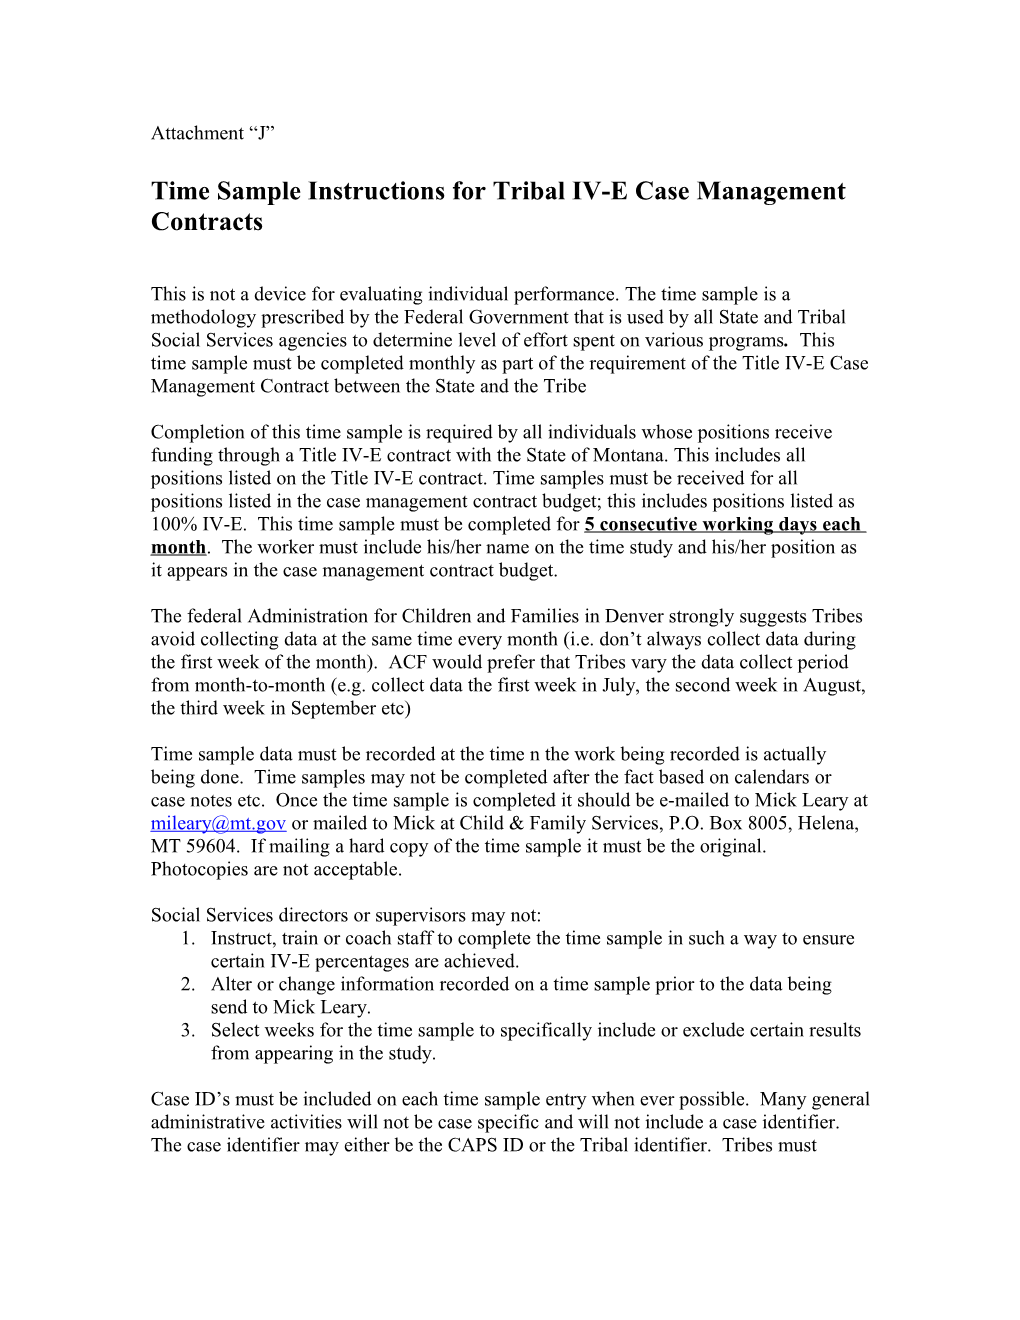 Time Sample Instructions for Tribal IV-E Case Management Contracts